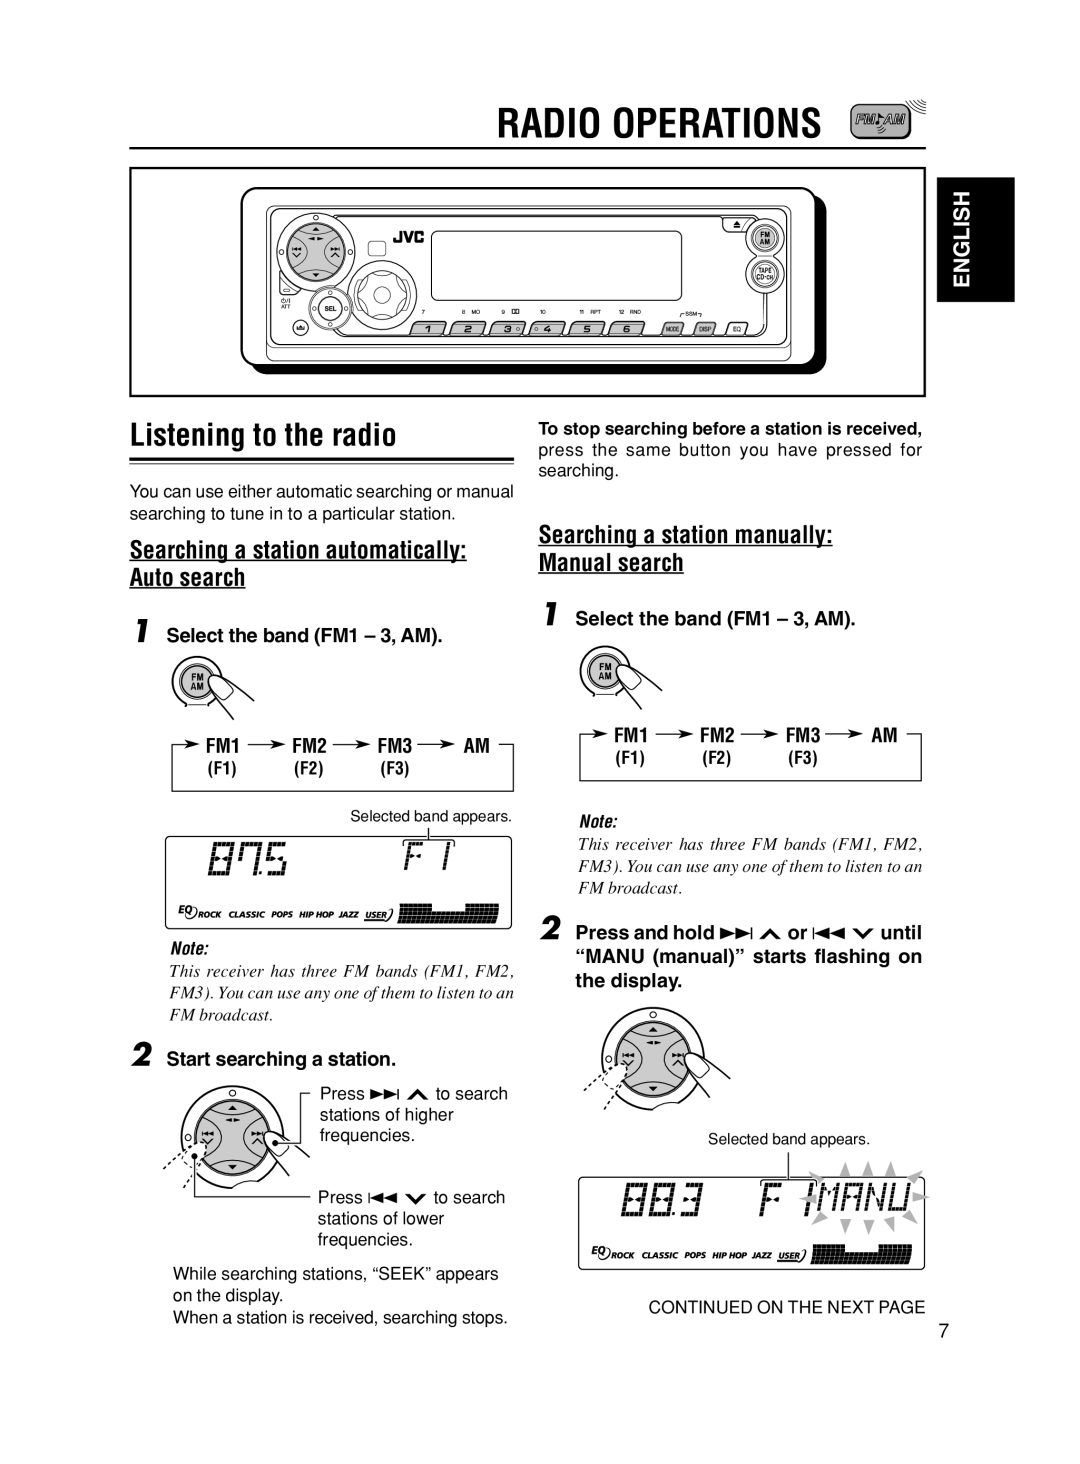 JVC KS-FX490 manual Radio Operations, Listening to the radio, Searching a station automatically Auto search, English 